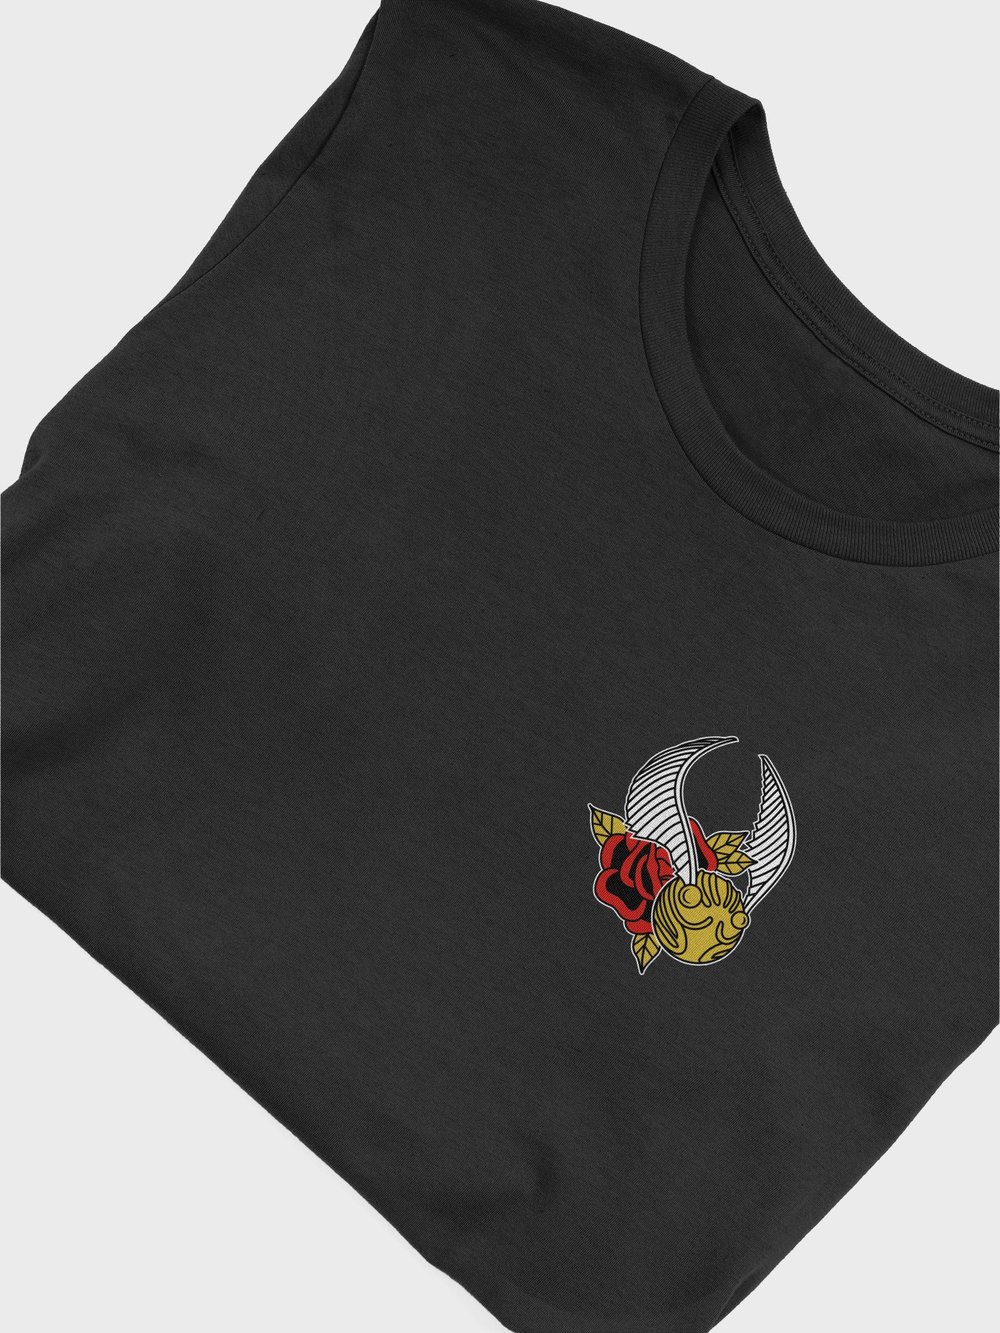 'Golden Snitch' Tee